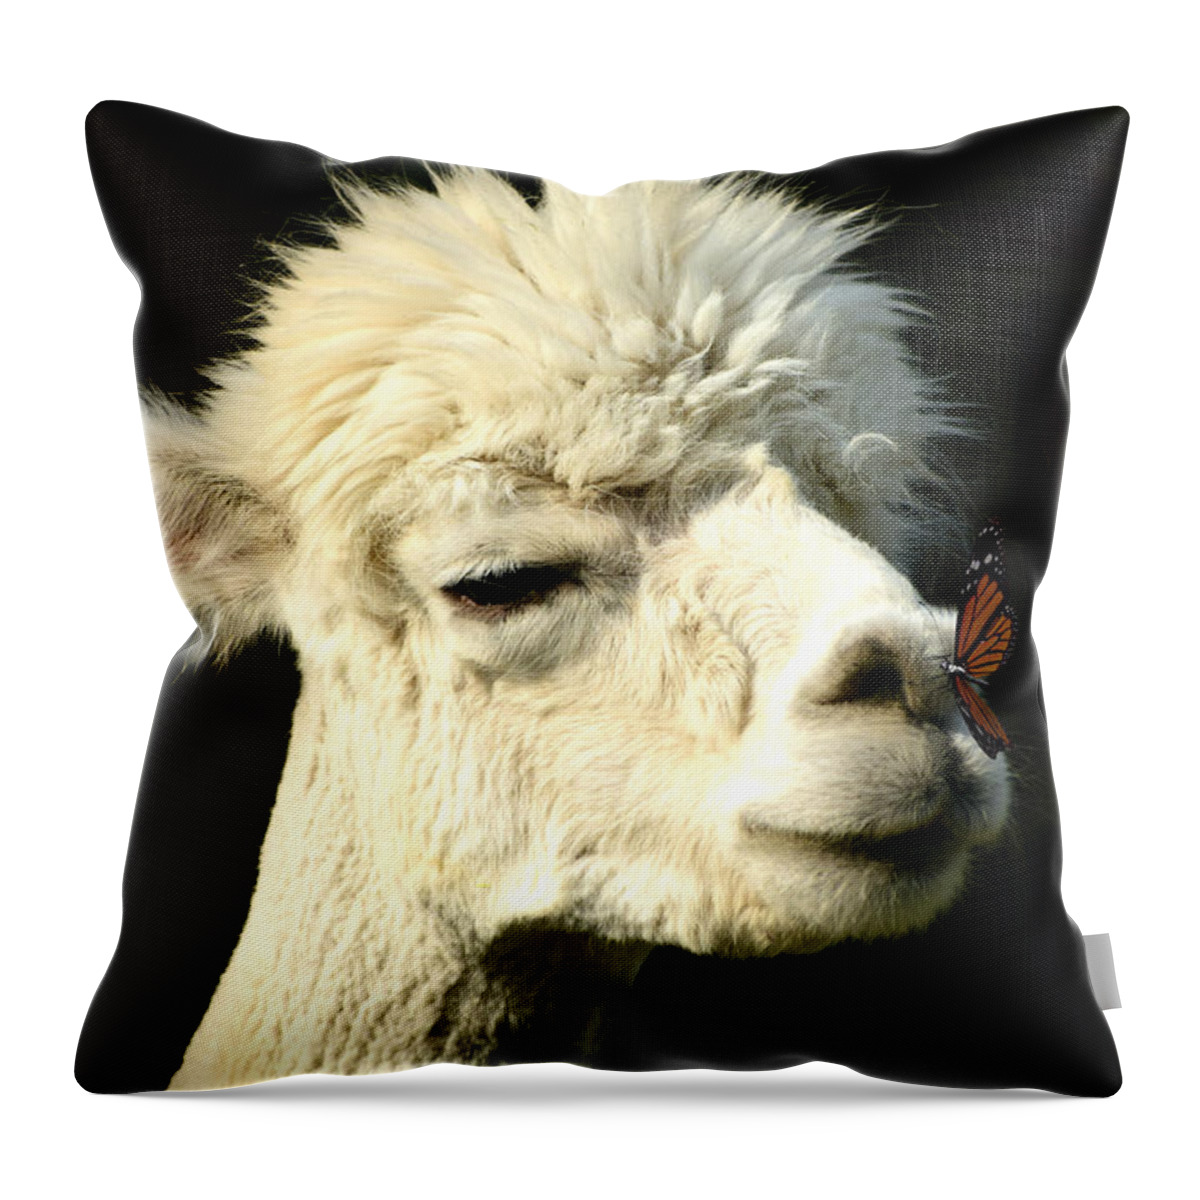 Alpaca Throw Pillow featuring the photograph Alpaca Meets Butterfly by Ally White